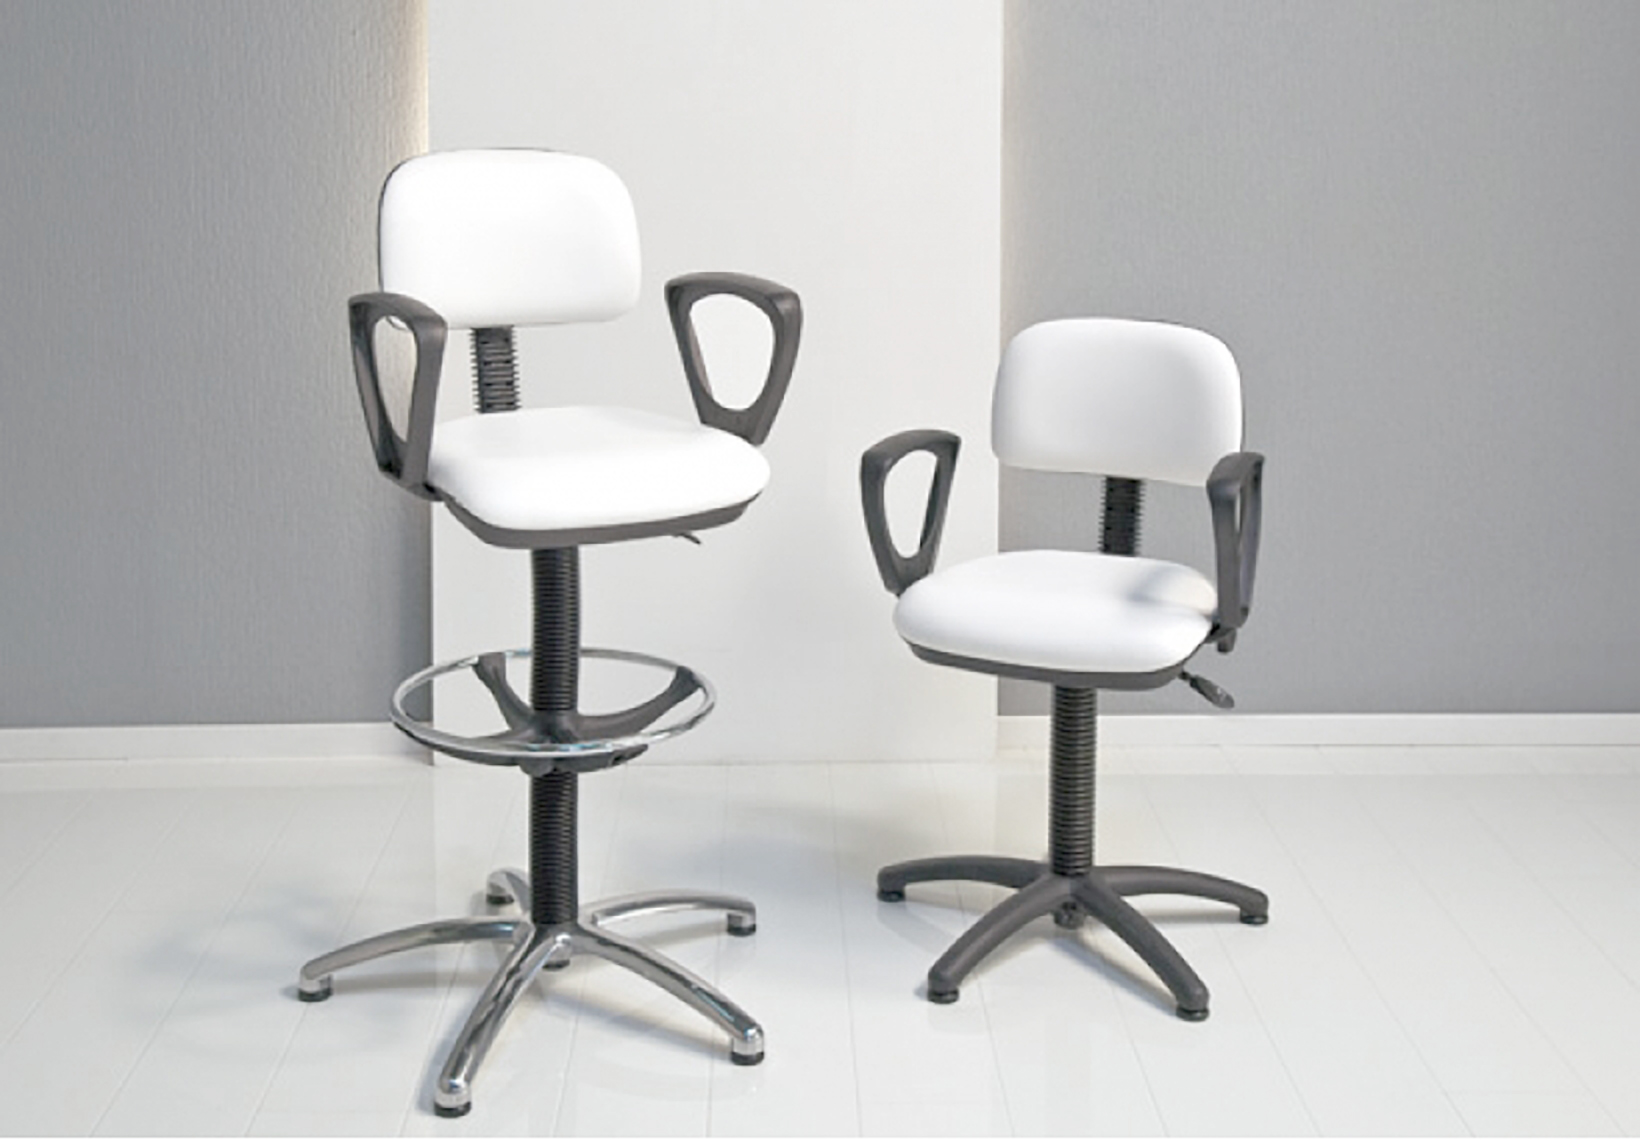 Make-Up Chair with Armrests